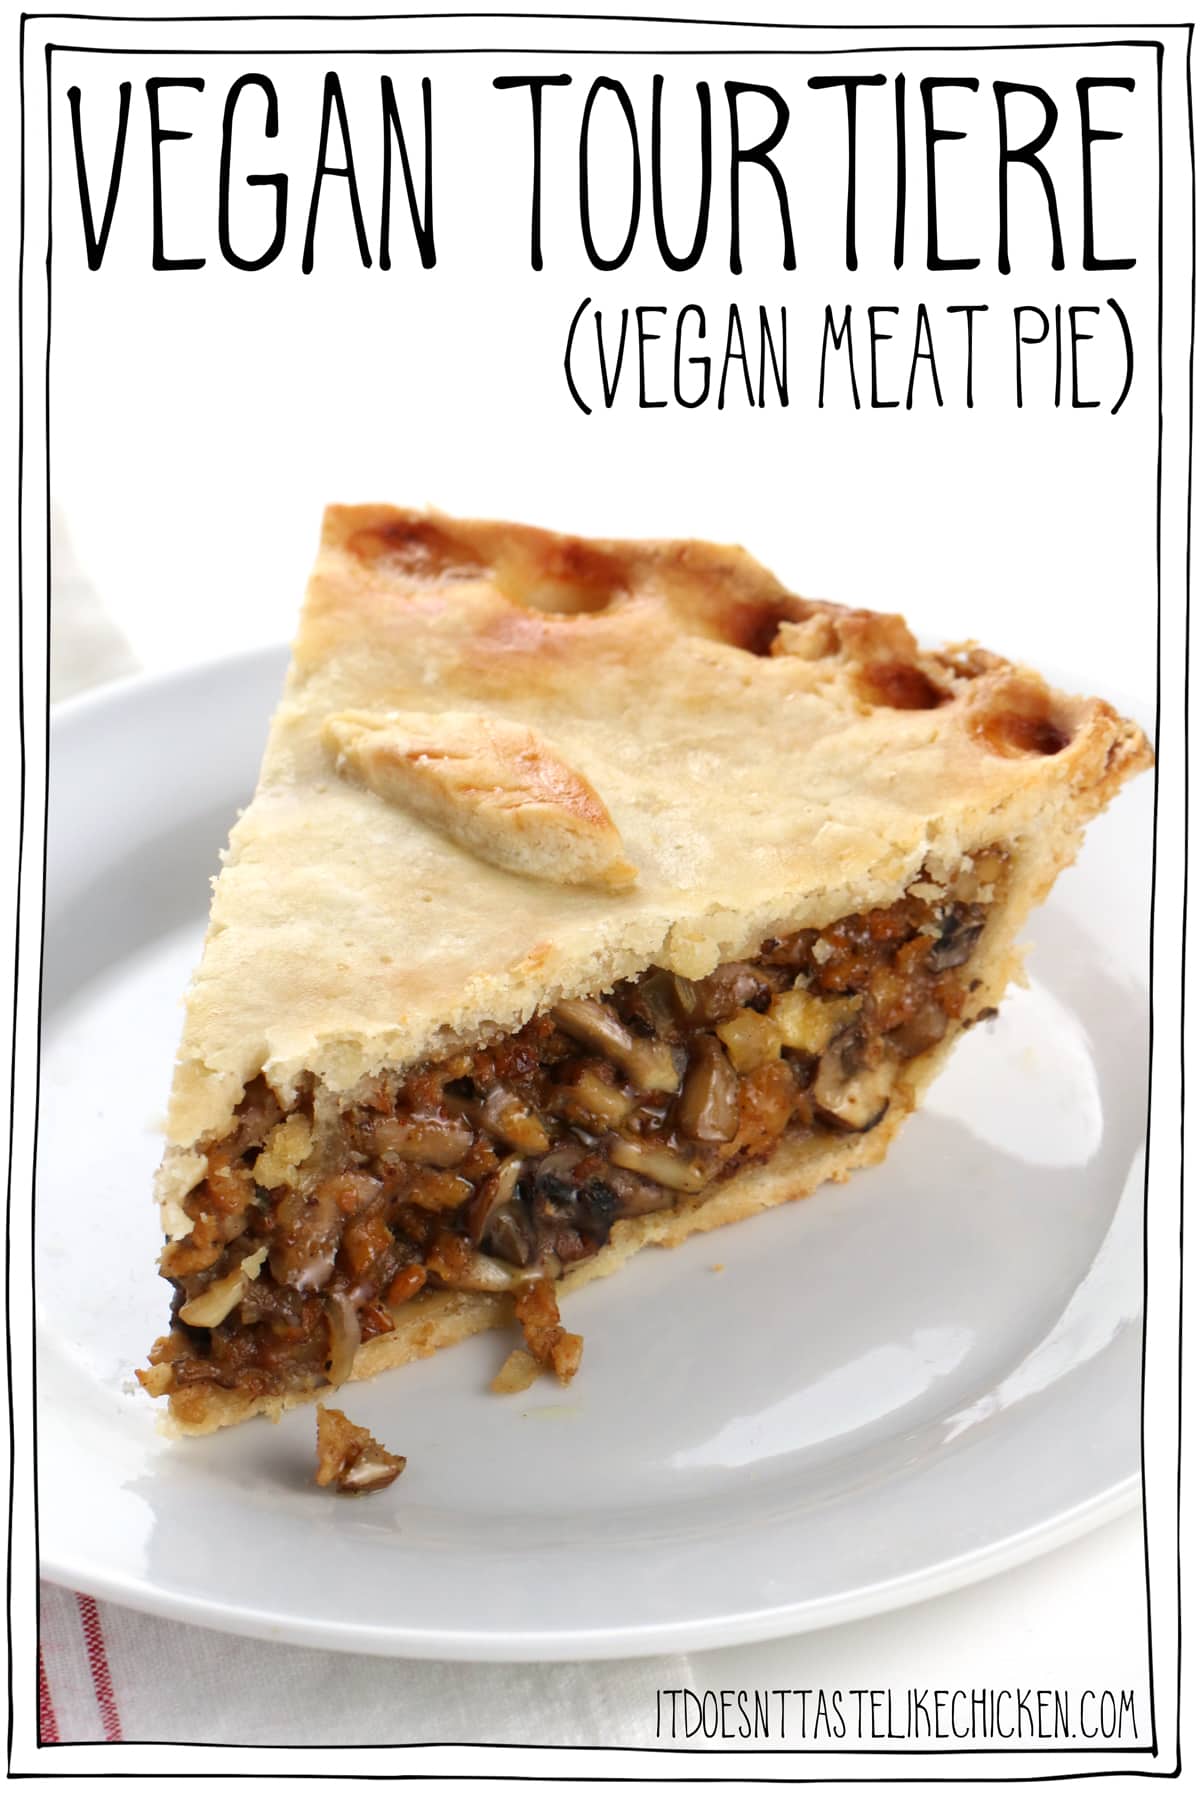 Vegan Tourtiere (vegan meat pie). This savoury pie is made with tofu and mushrooms for the best chewy, juicy, meaty texture. A fantastic centrepiece for Thanksgiving or Christmas. Make ahead. Gluten-free and oil-free options. #itdoesnttastelikechicken #veganrecipes 